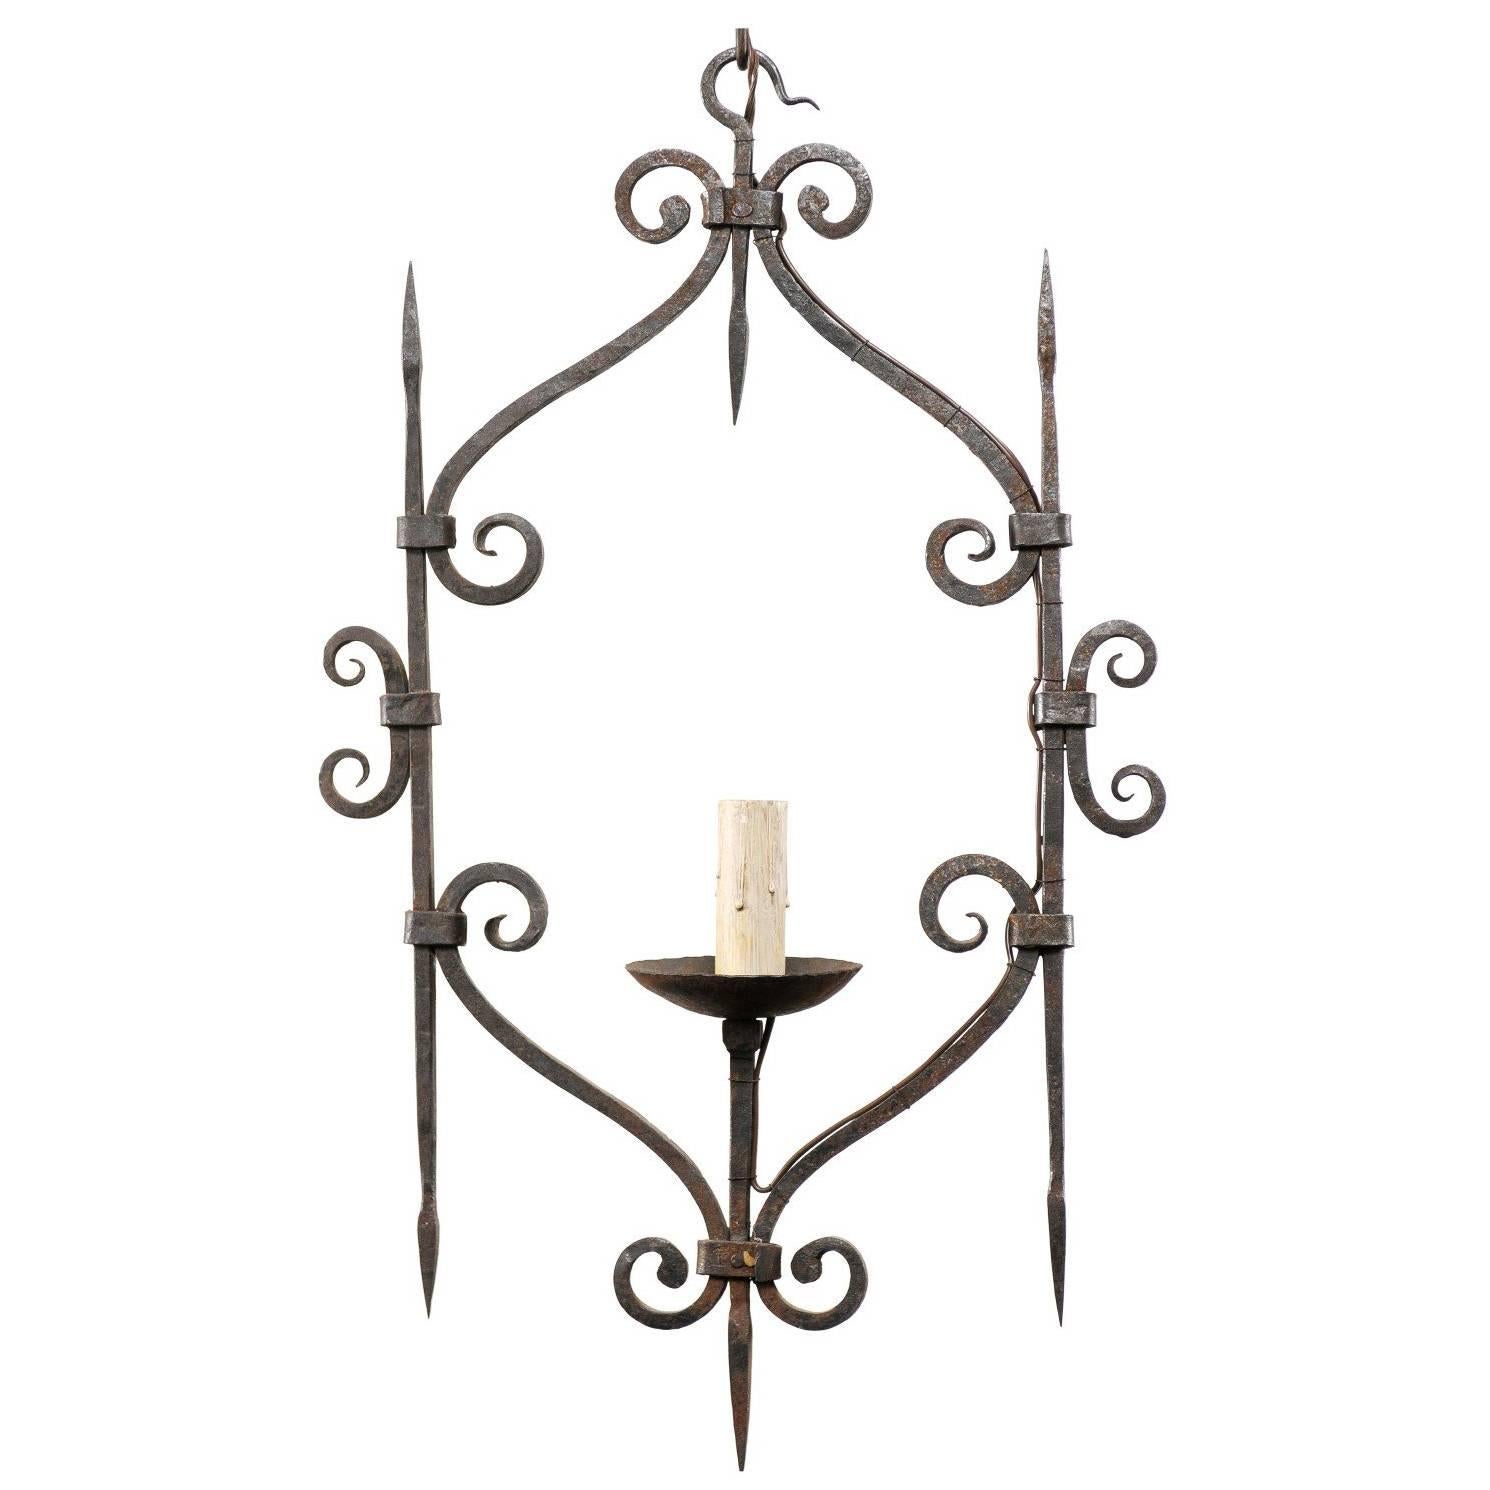 French Single Light Scrolled Hand-Forged Iron Chandelier, Midcentury, Vintage